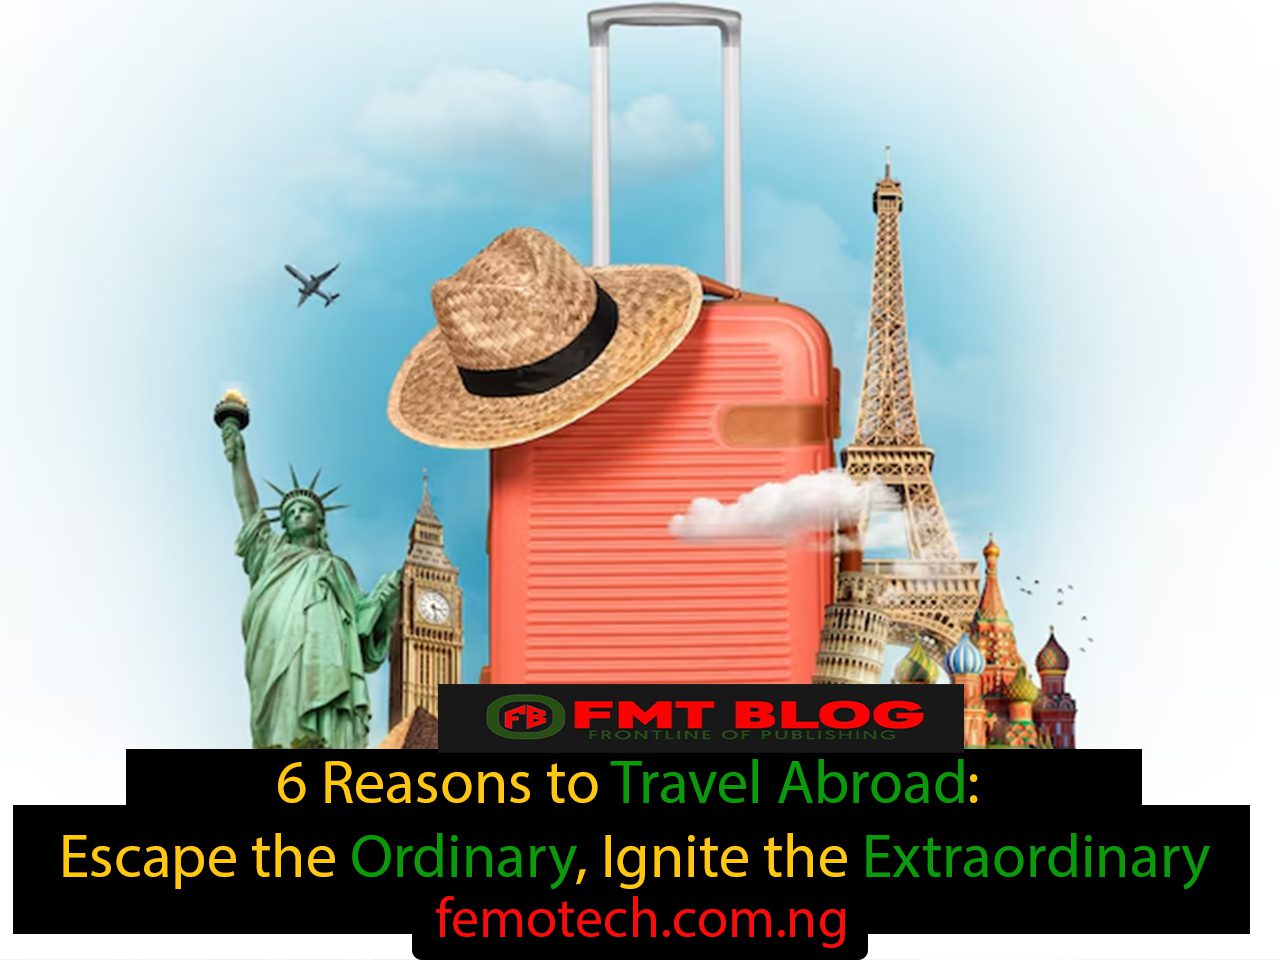 6 Reasons to Travel Abroad: Escape the Ordinary, Ignite the Extraordinary